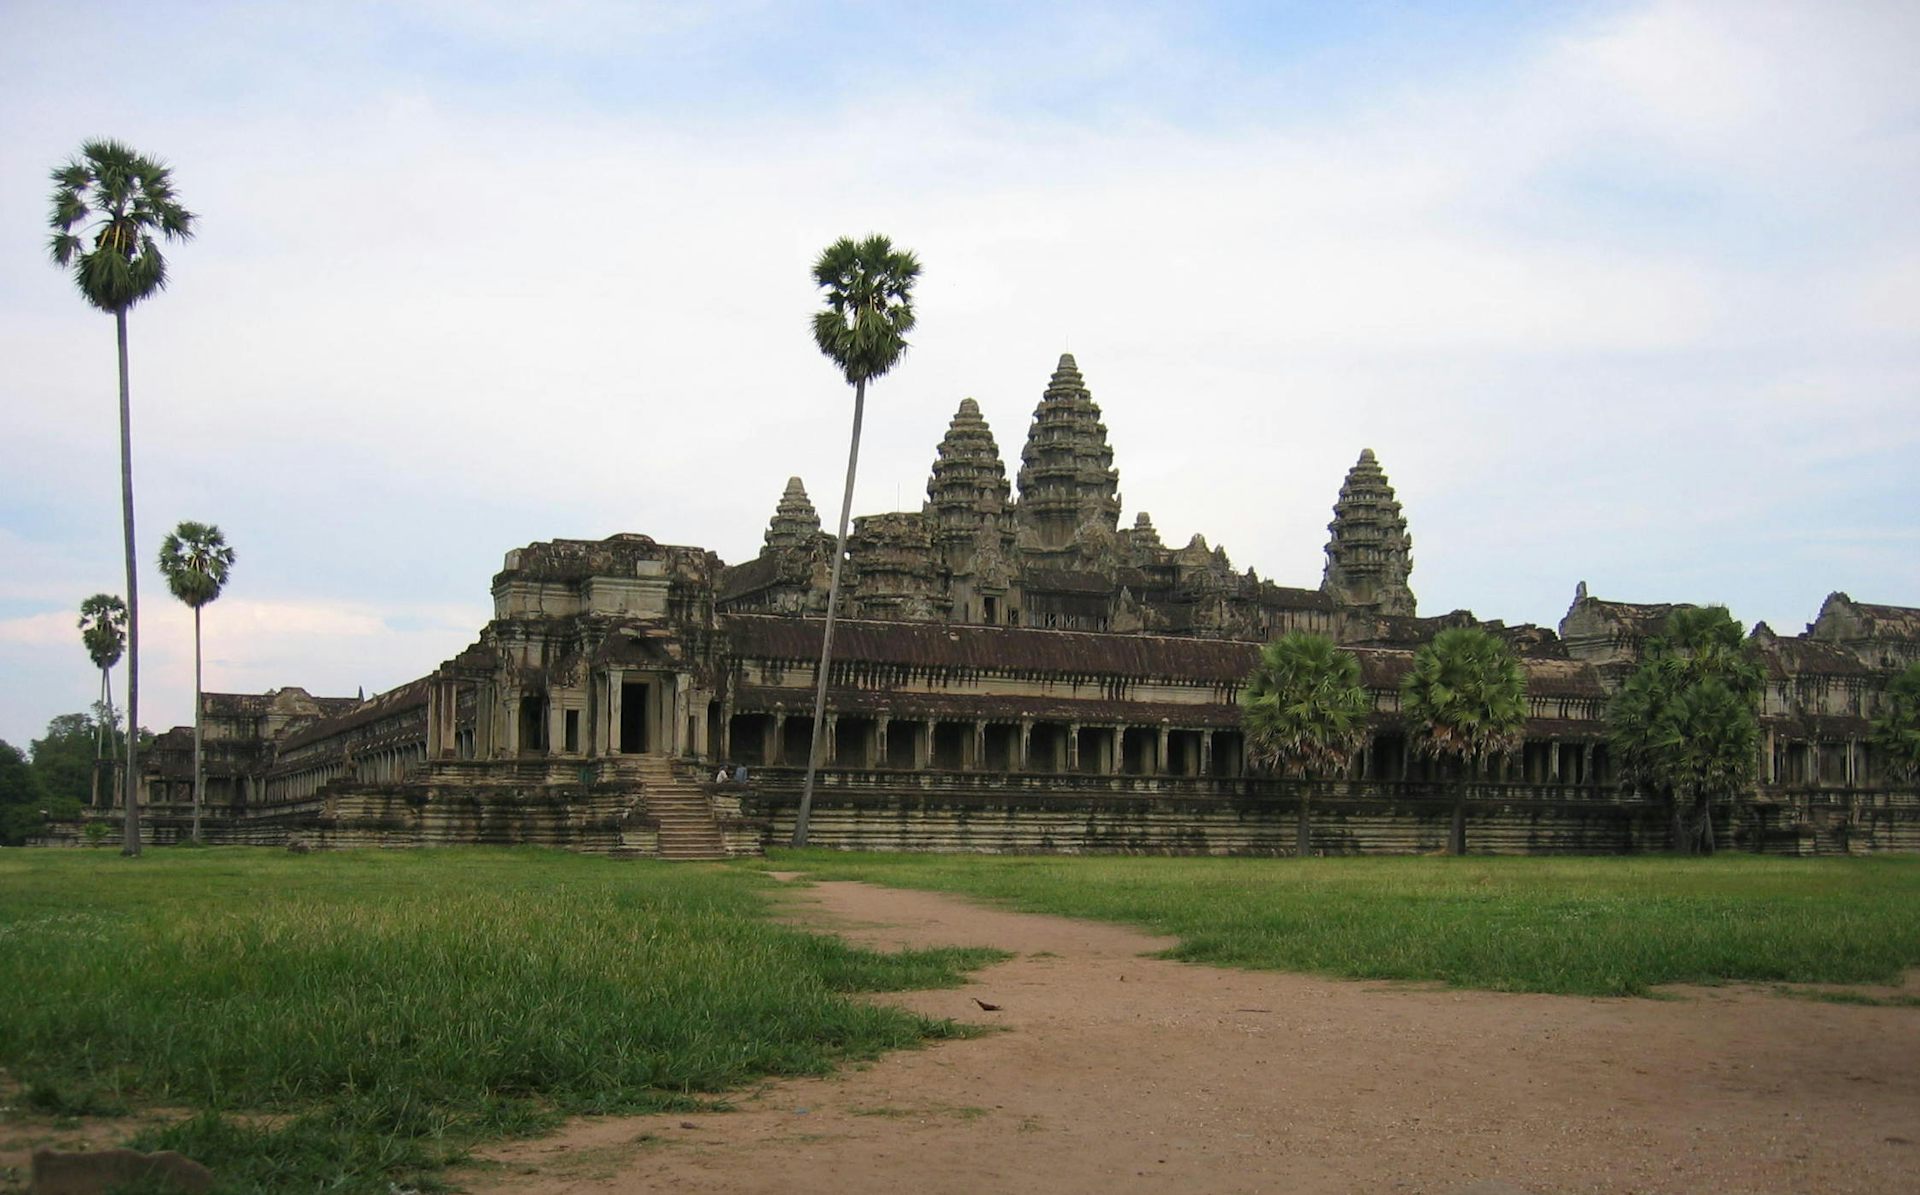 Angkor Wat temple with palm trees